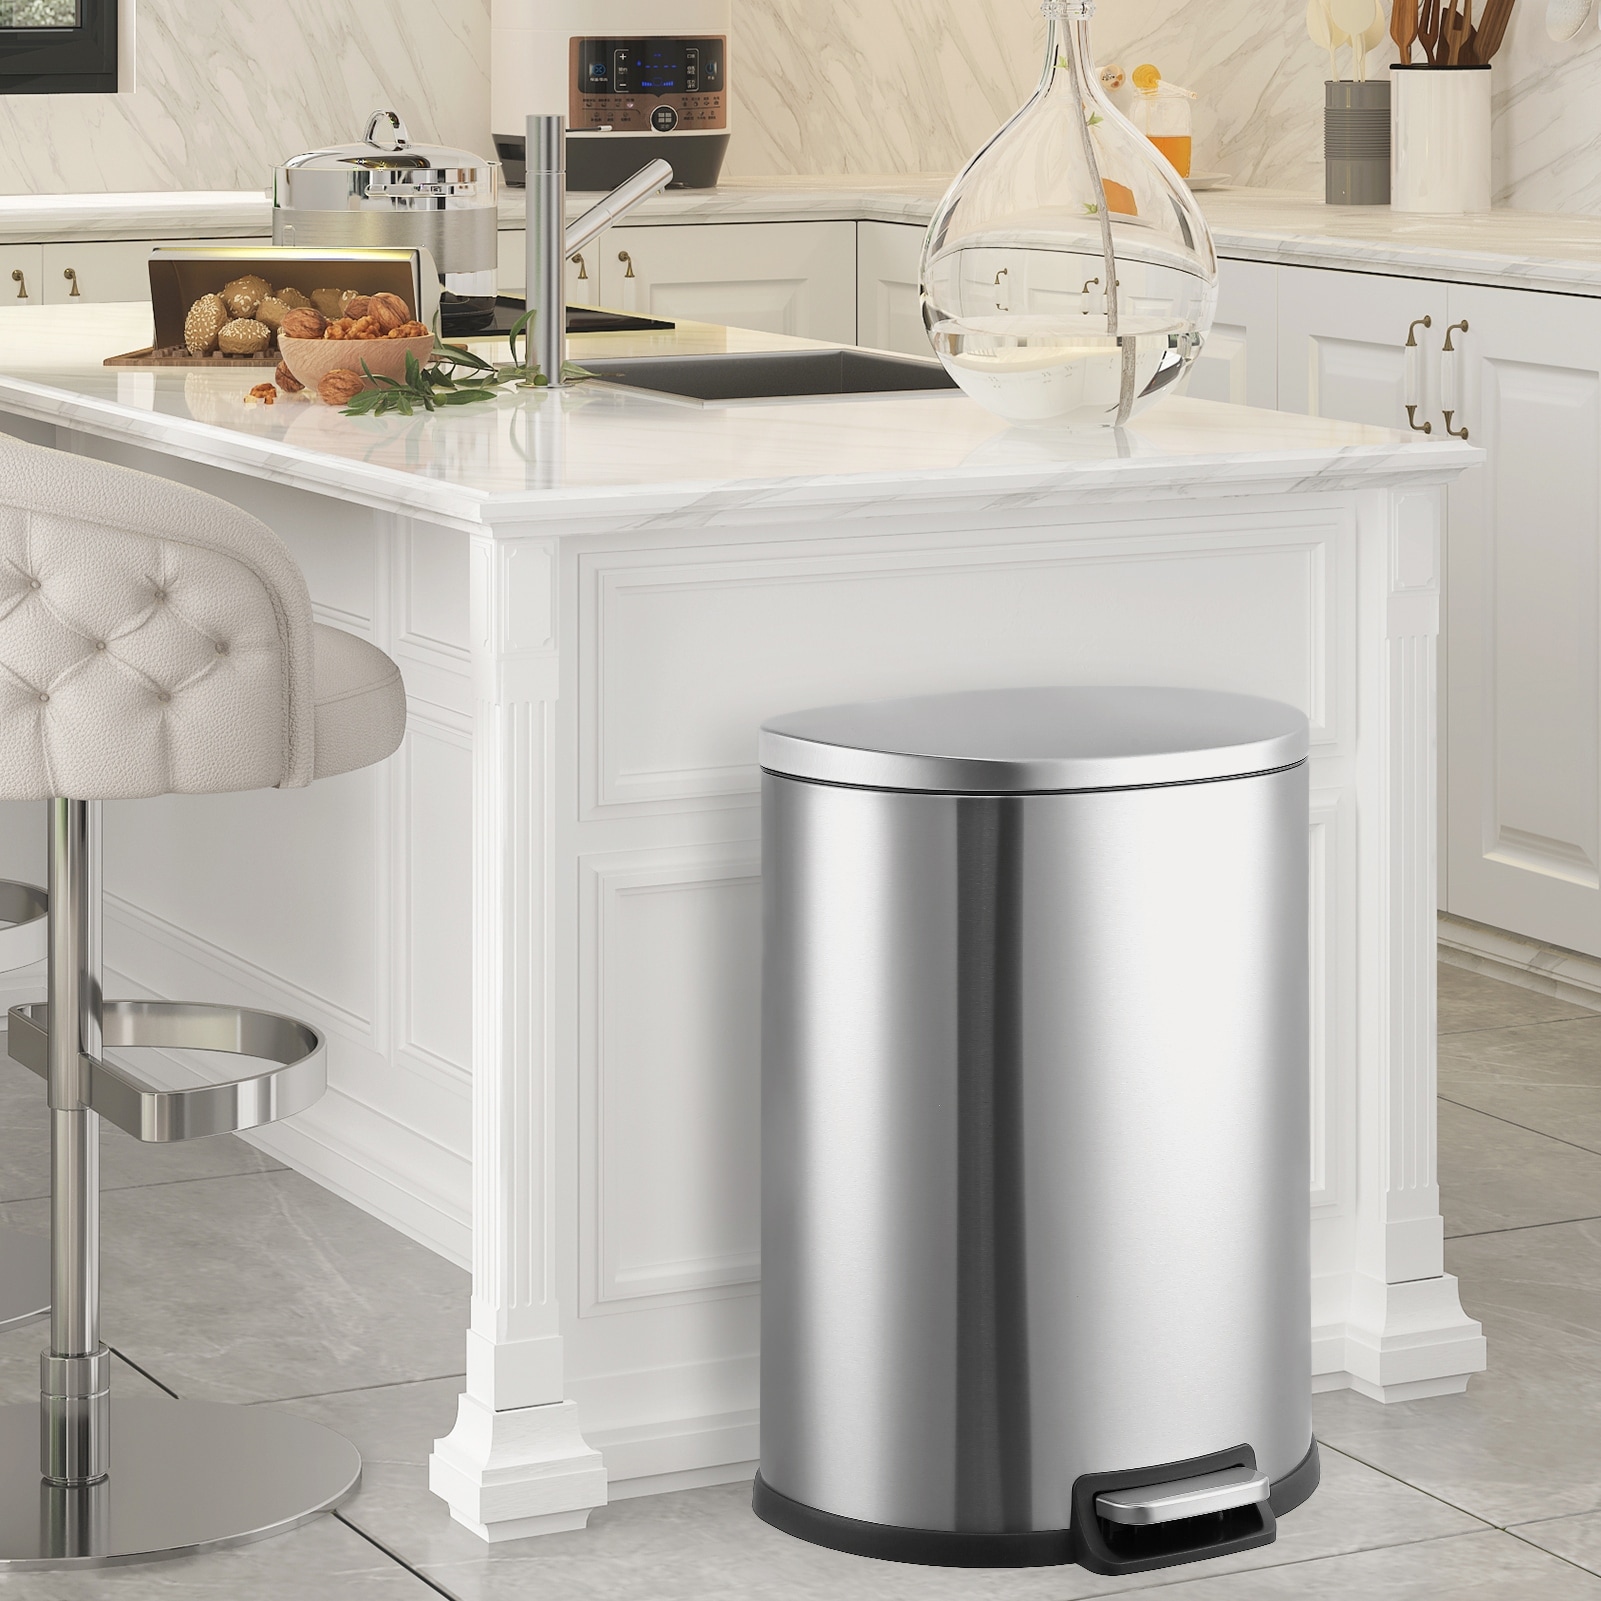 https://ak1.ostkcdn.com/images/products/is/images/direct/797136ecc6bdc826ffc47b0e475bad27a9b69b1d/Stainless-Steel-Trash-Can%2C-50-Liter---13-Gallon.jpg